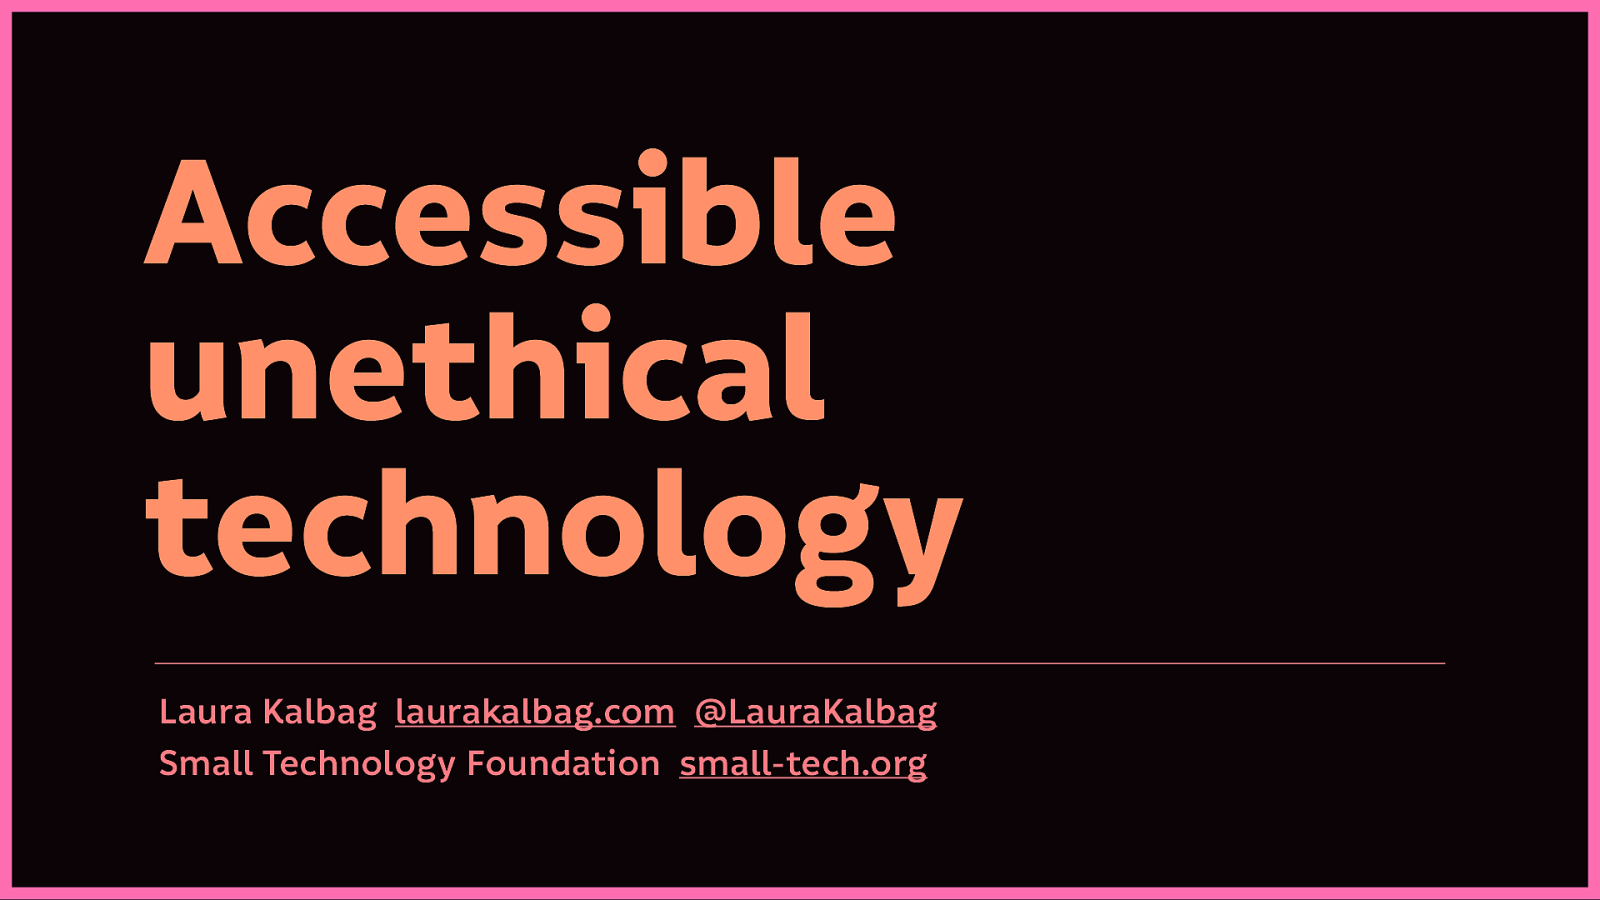 Accessible unethical technology